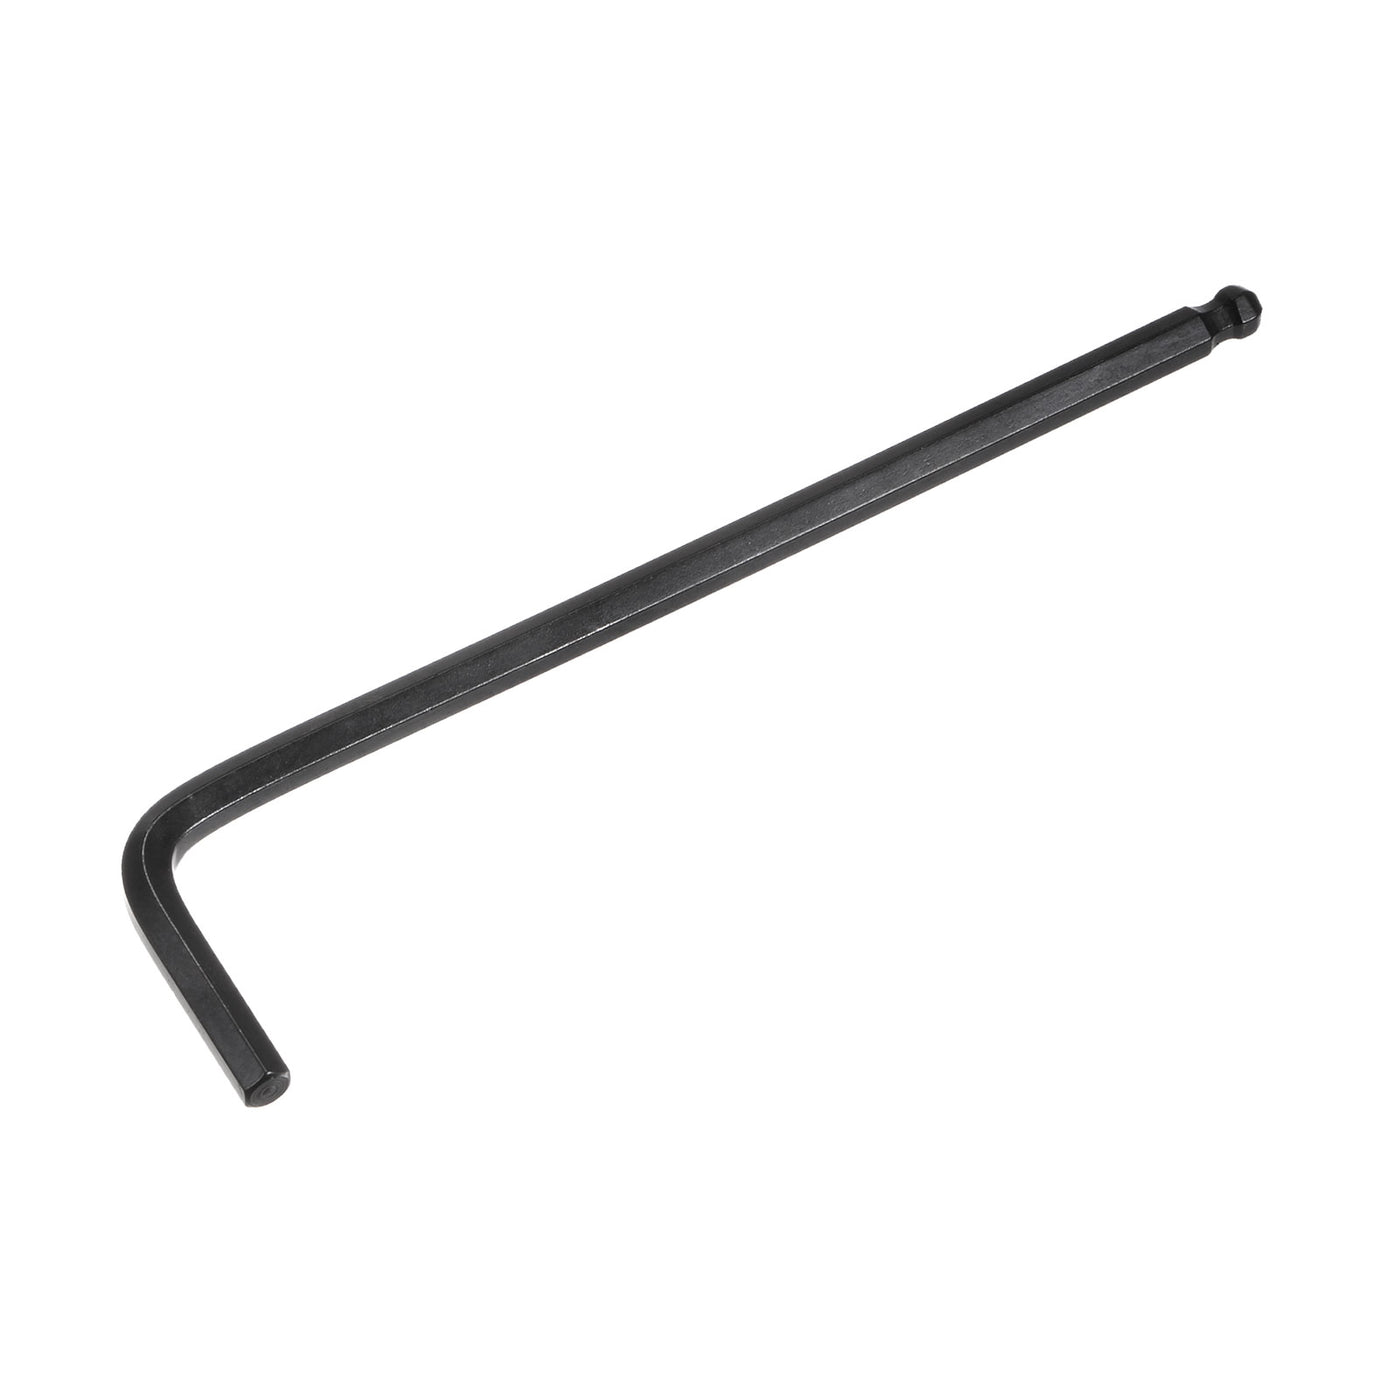 uxcell Uxcell 3/16" Ball End Hex Key Wrench, L Shaped Long Arm CR-V Repairing Tool, Black